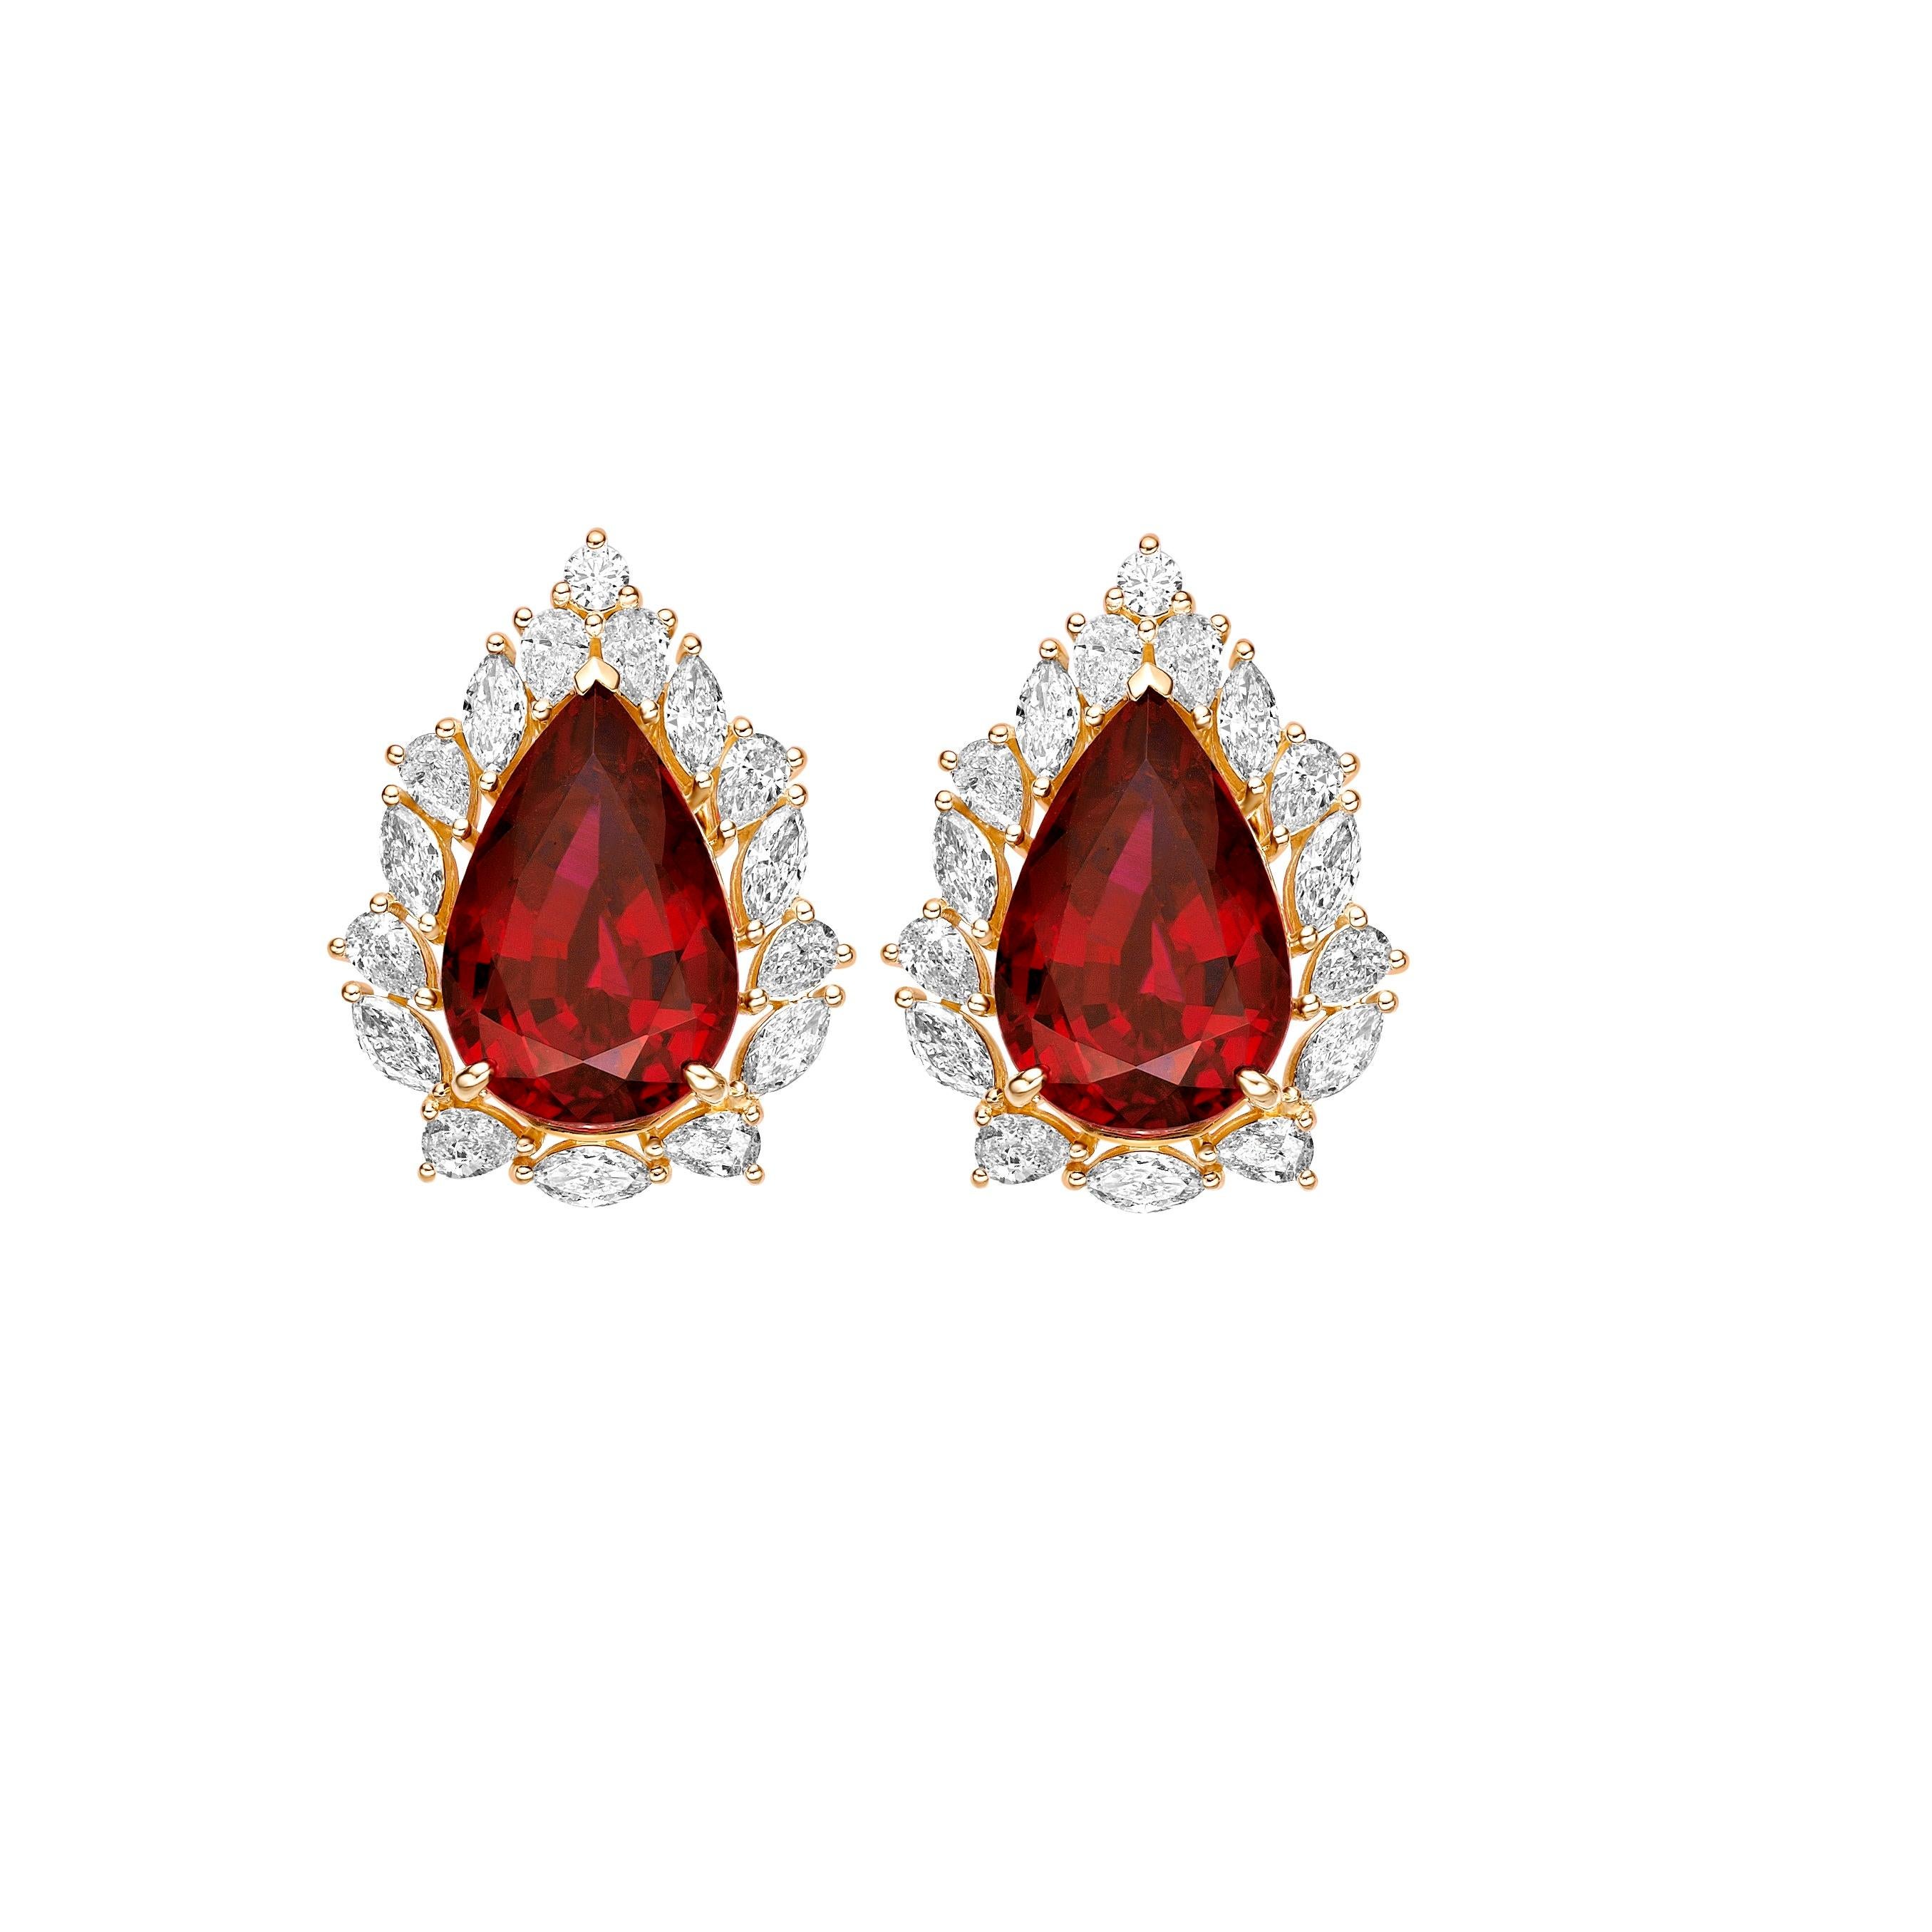 Contemporary 20.955 Carat Rubellite Stud Earrings in 18Karat Yellow Gold with White Diamond. For Sale